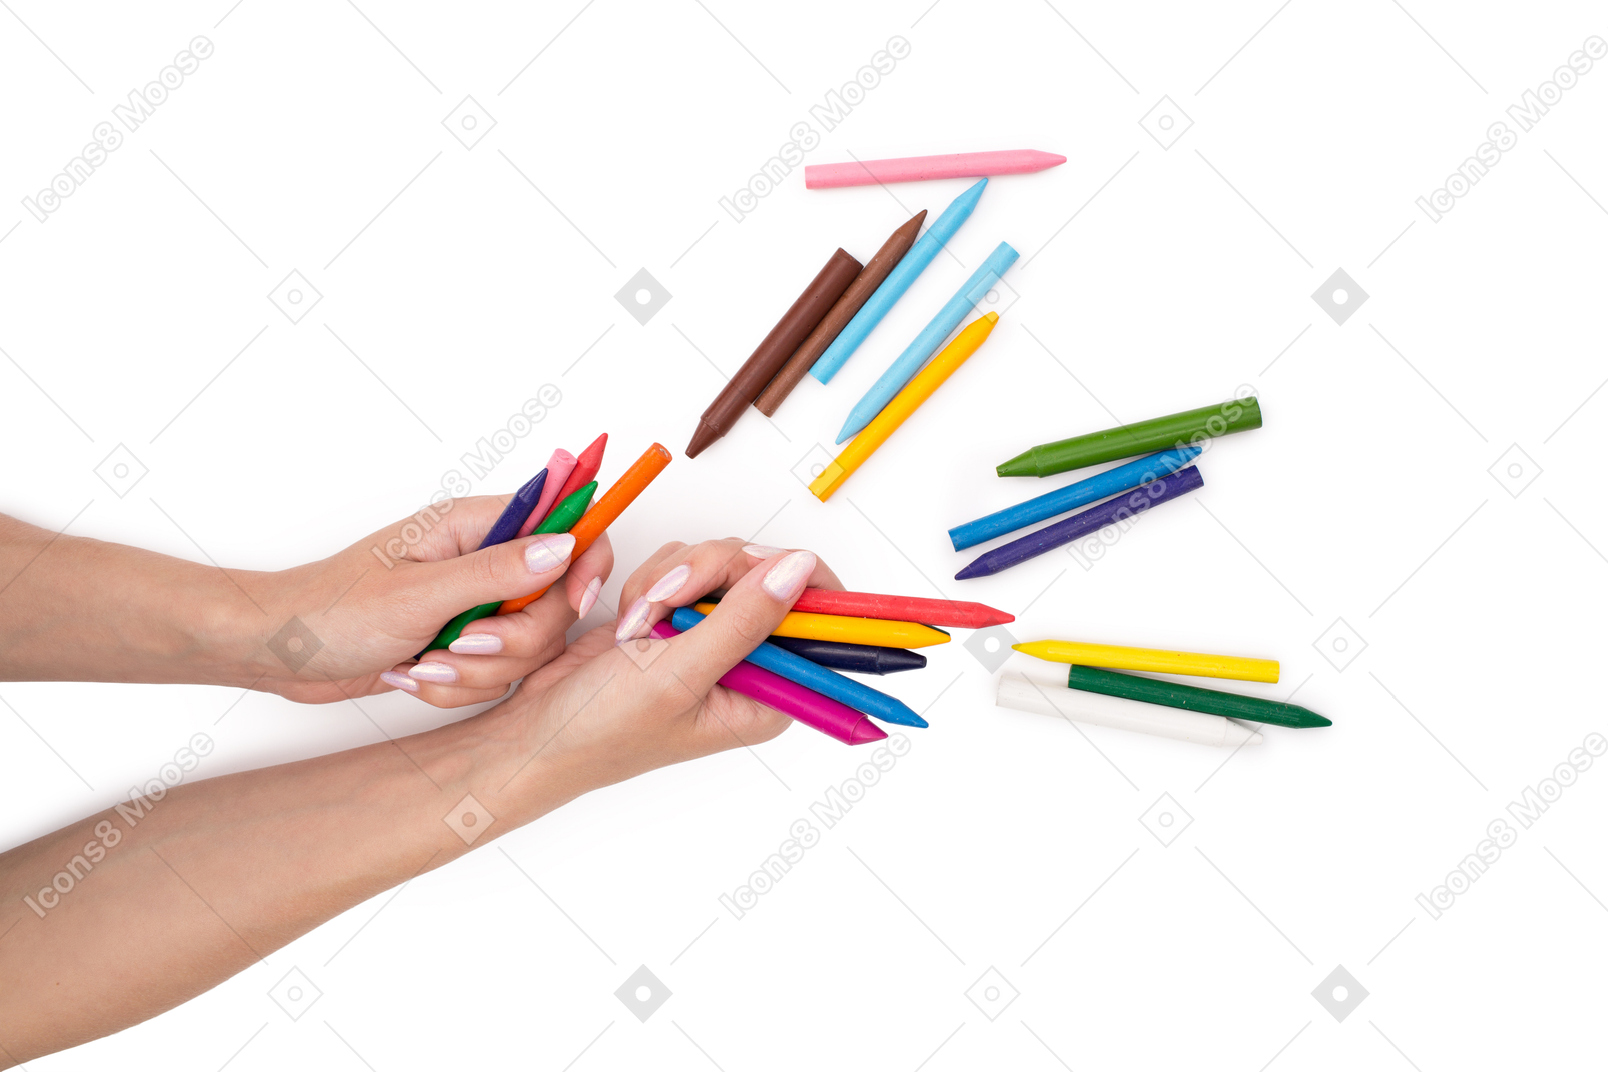 Hands holding multicolored crayons